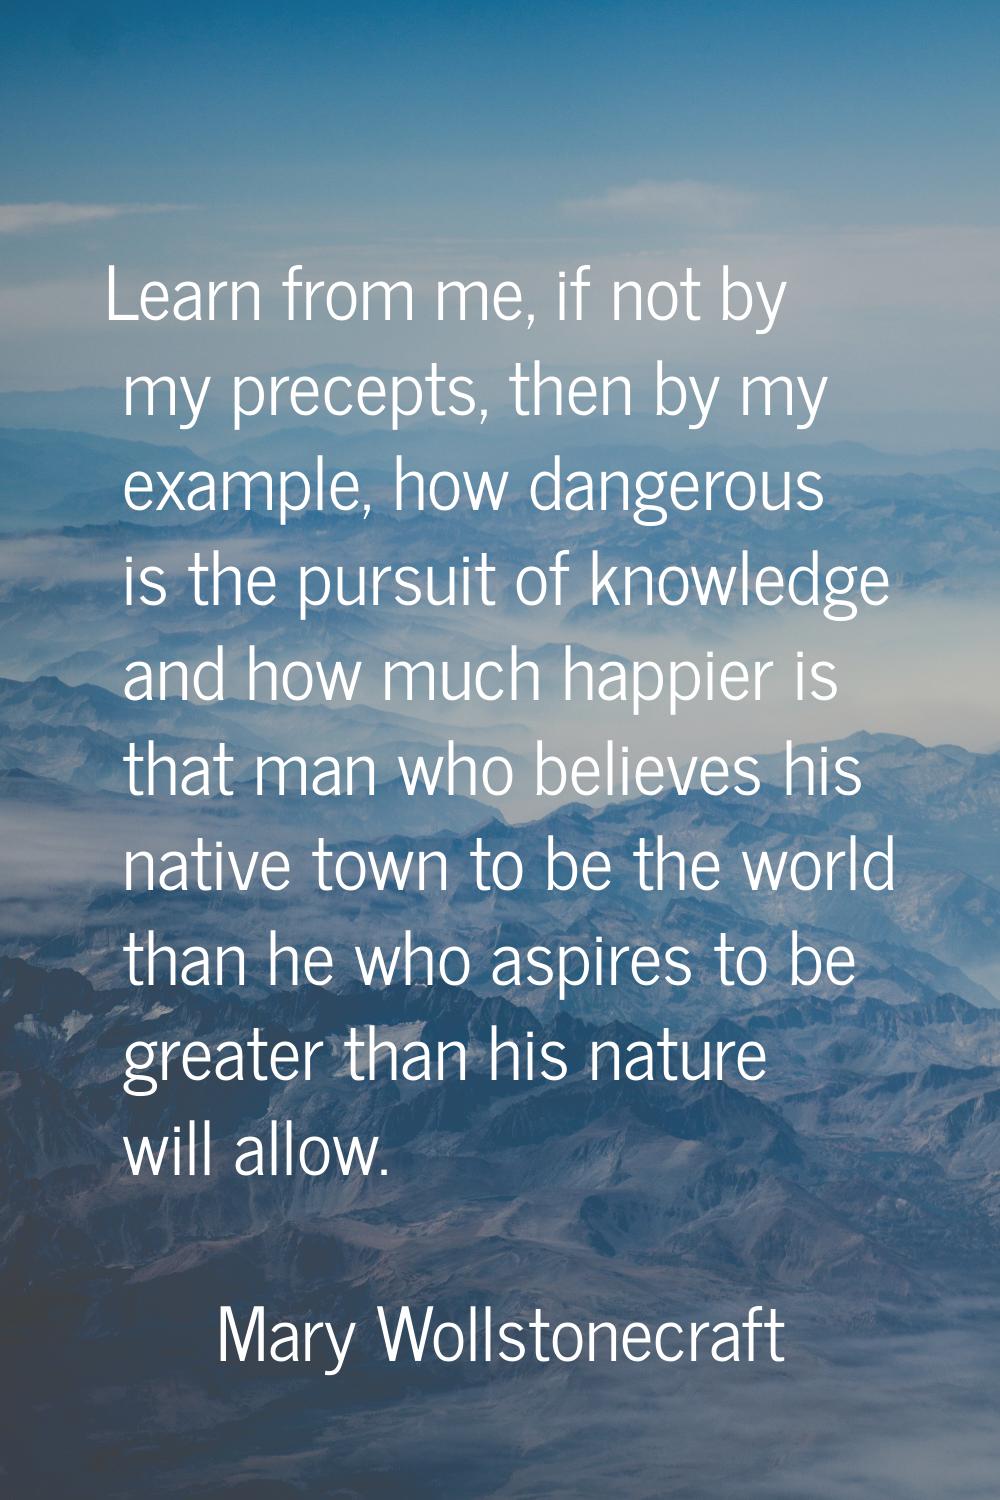 Learn from me, if not by my precepts, then by my example, how dangerous is the pursuit of knowledge